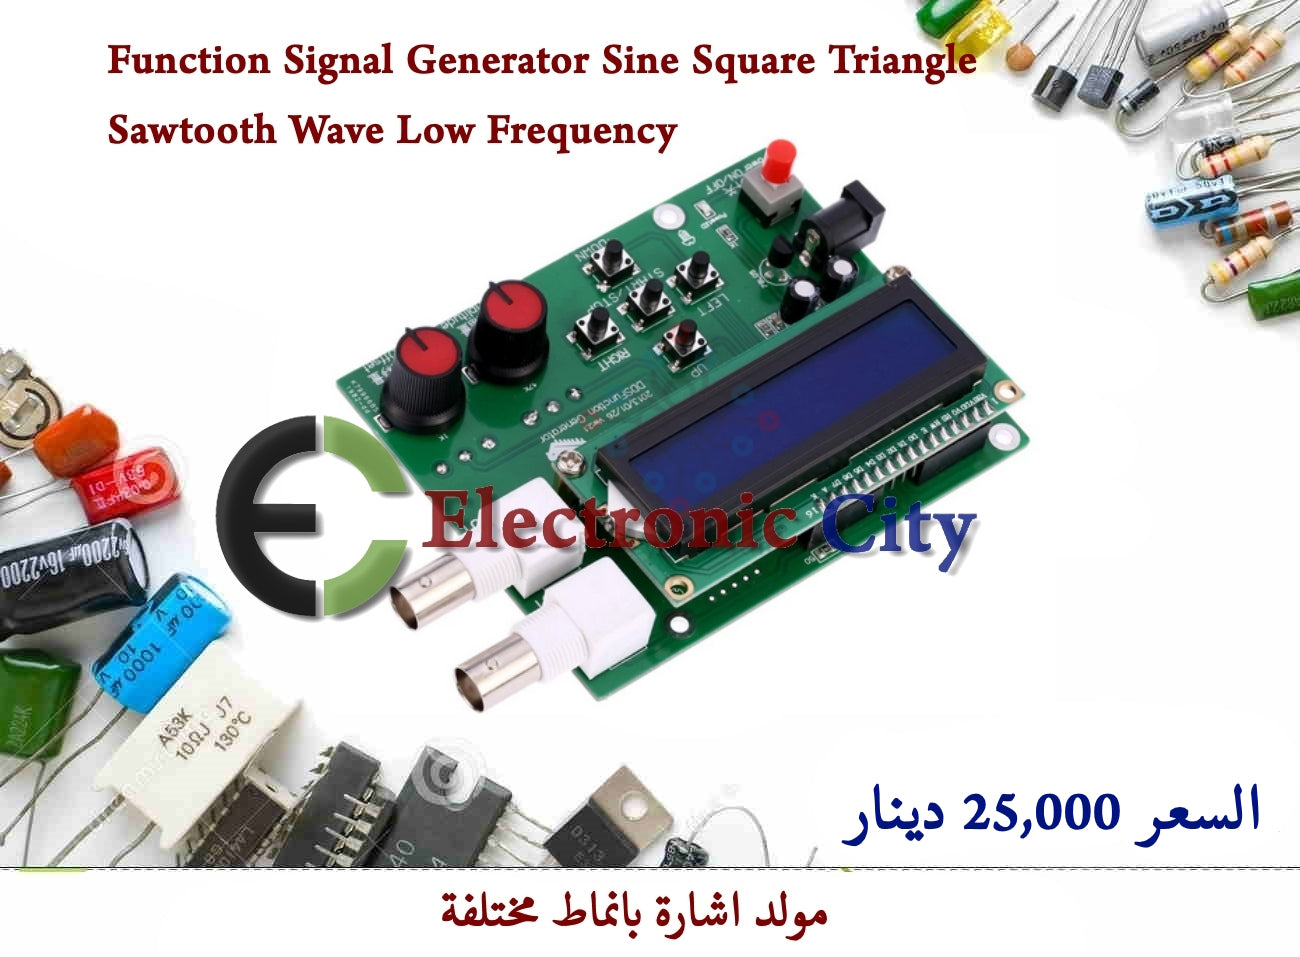 Function Signal Generator Sine Square Triangle Sawtooth Wave Low Frequency